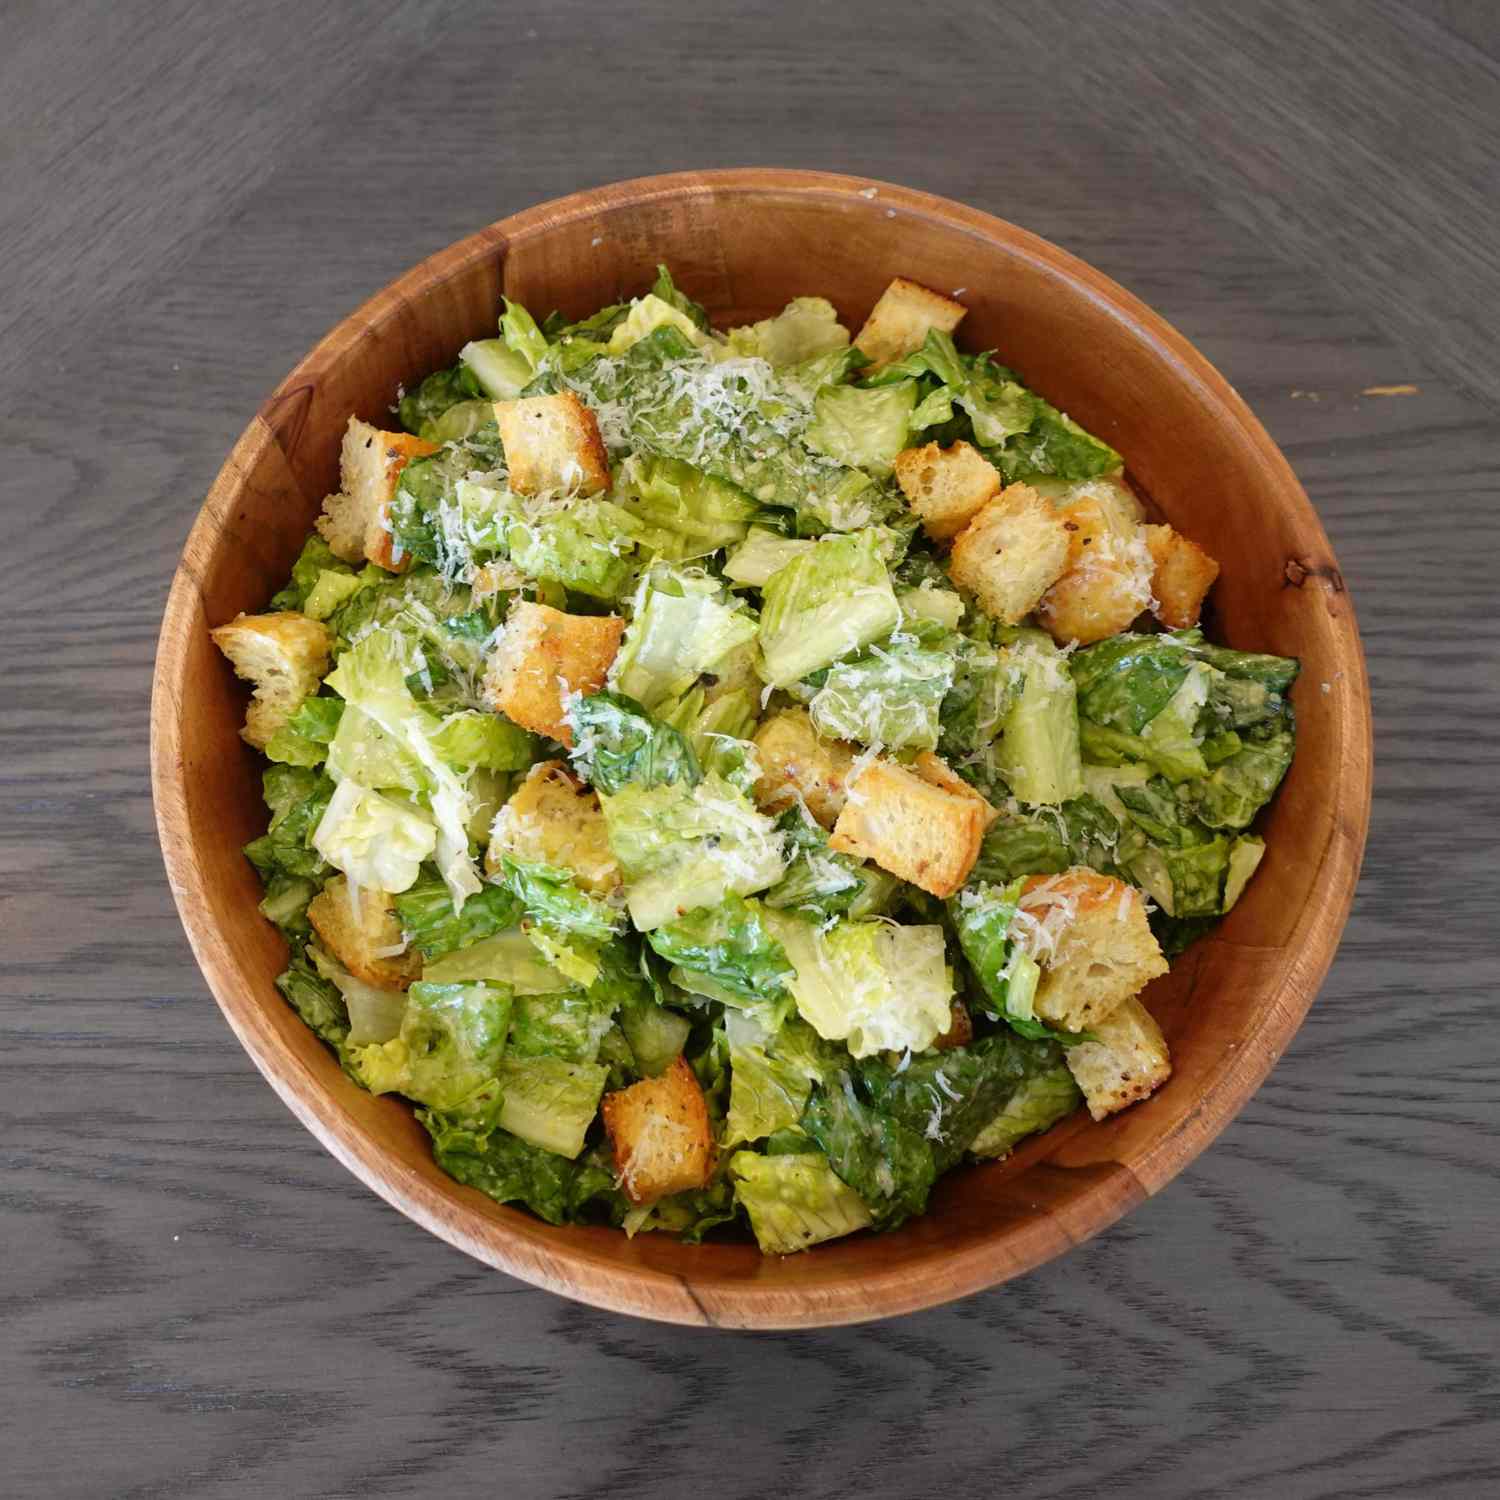 Caesar salad with croutons in a wooden salad bowl